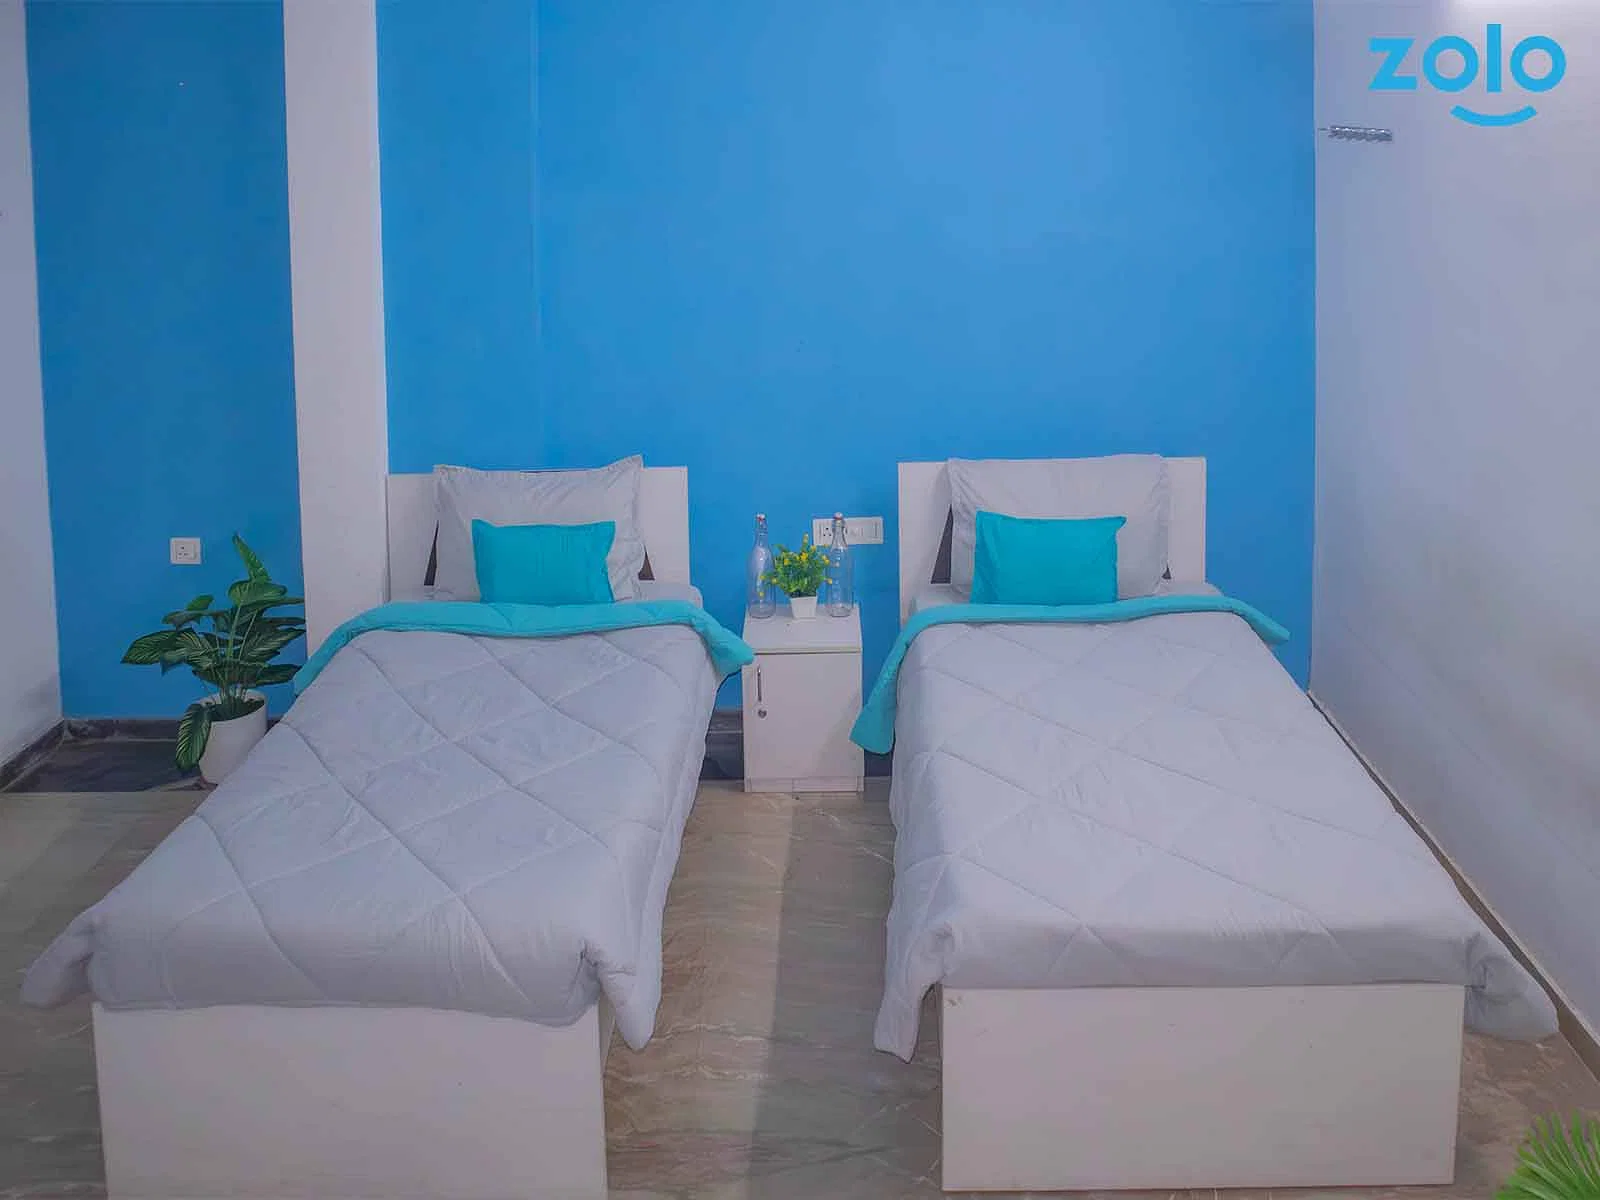 budget-friendly PGs and hostels for boys and girls with single rooms with daily hopusekeeping-Zolo Dorian